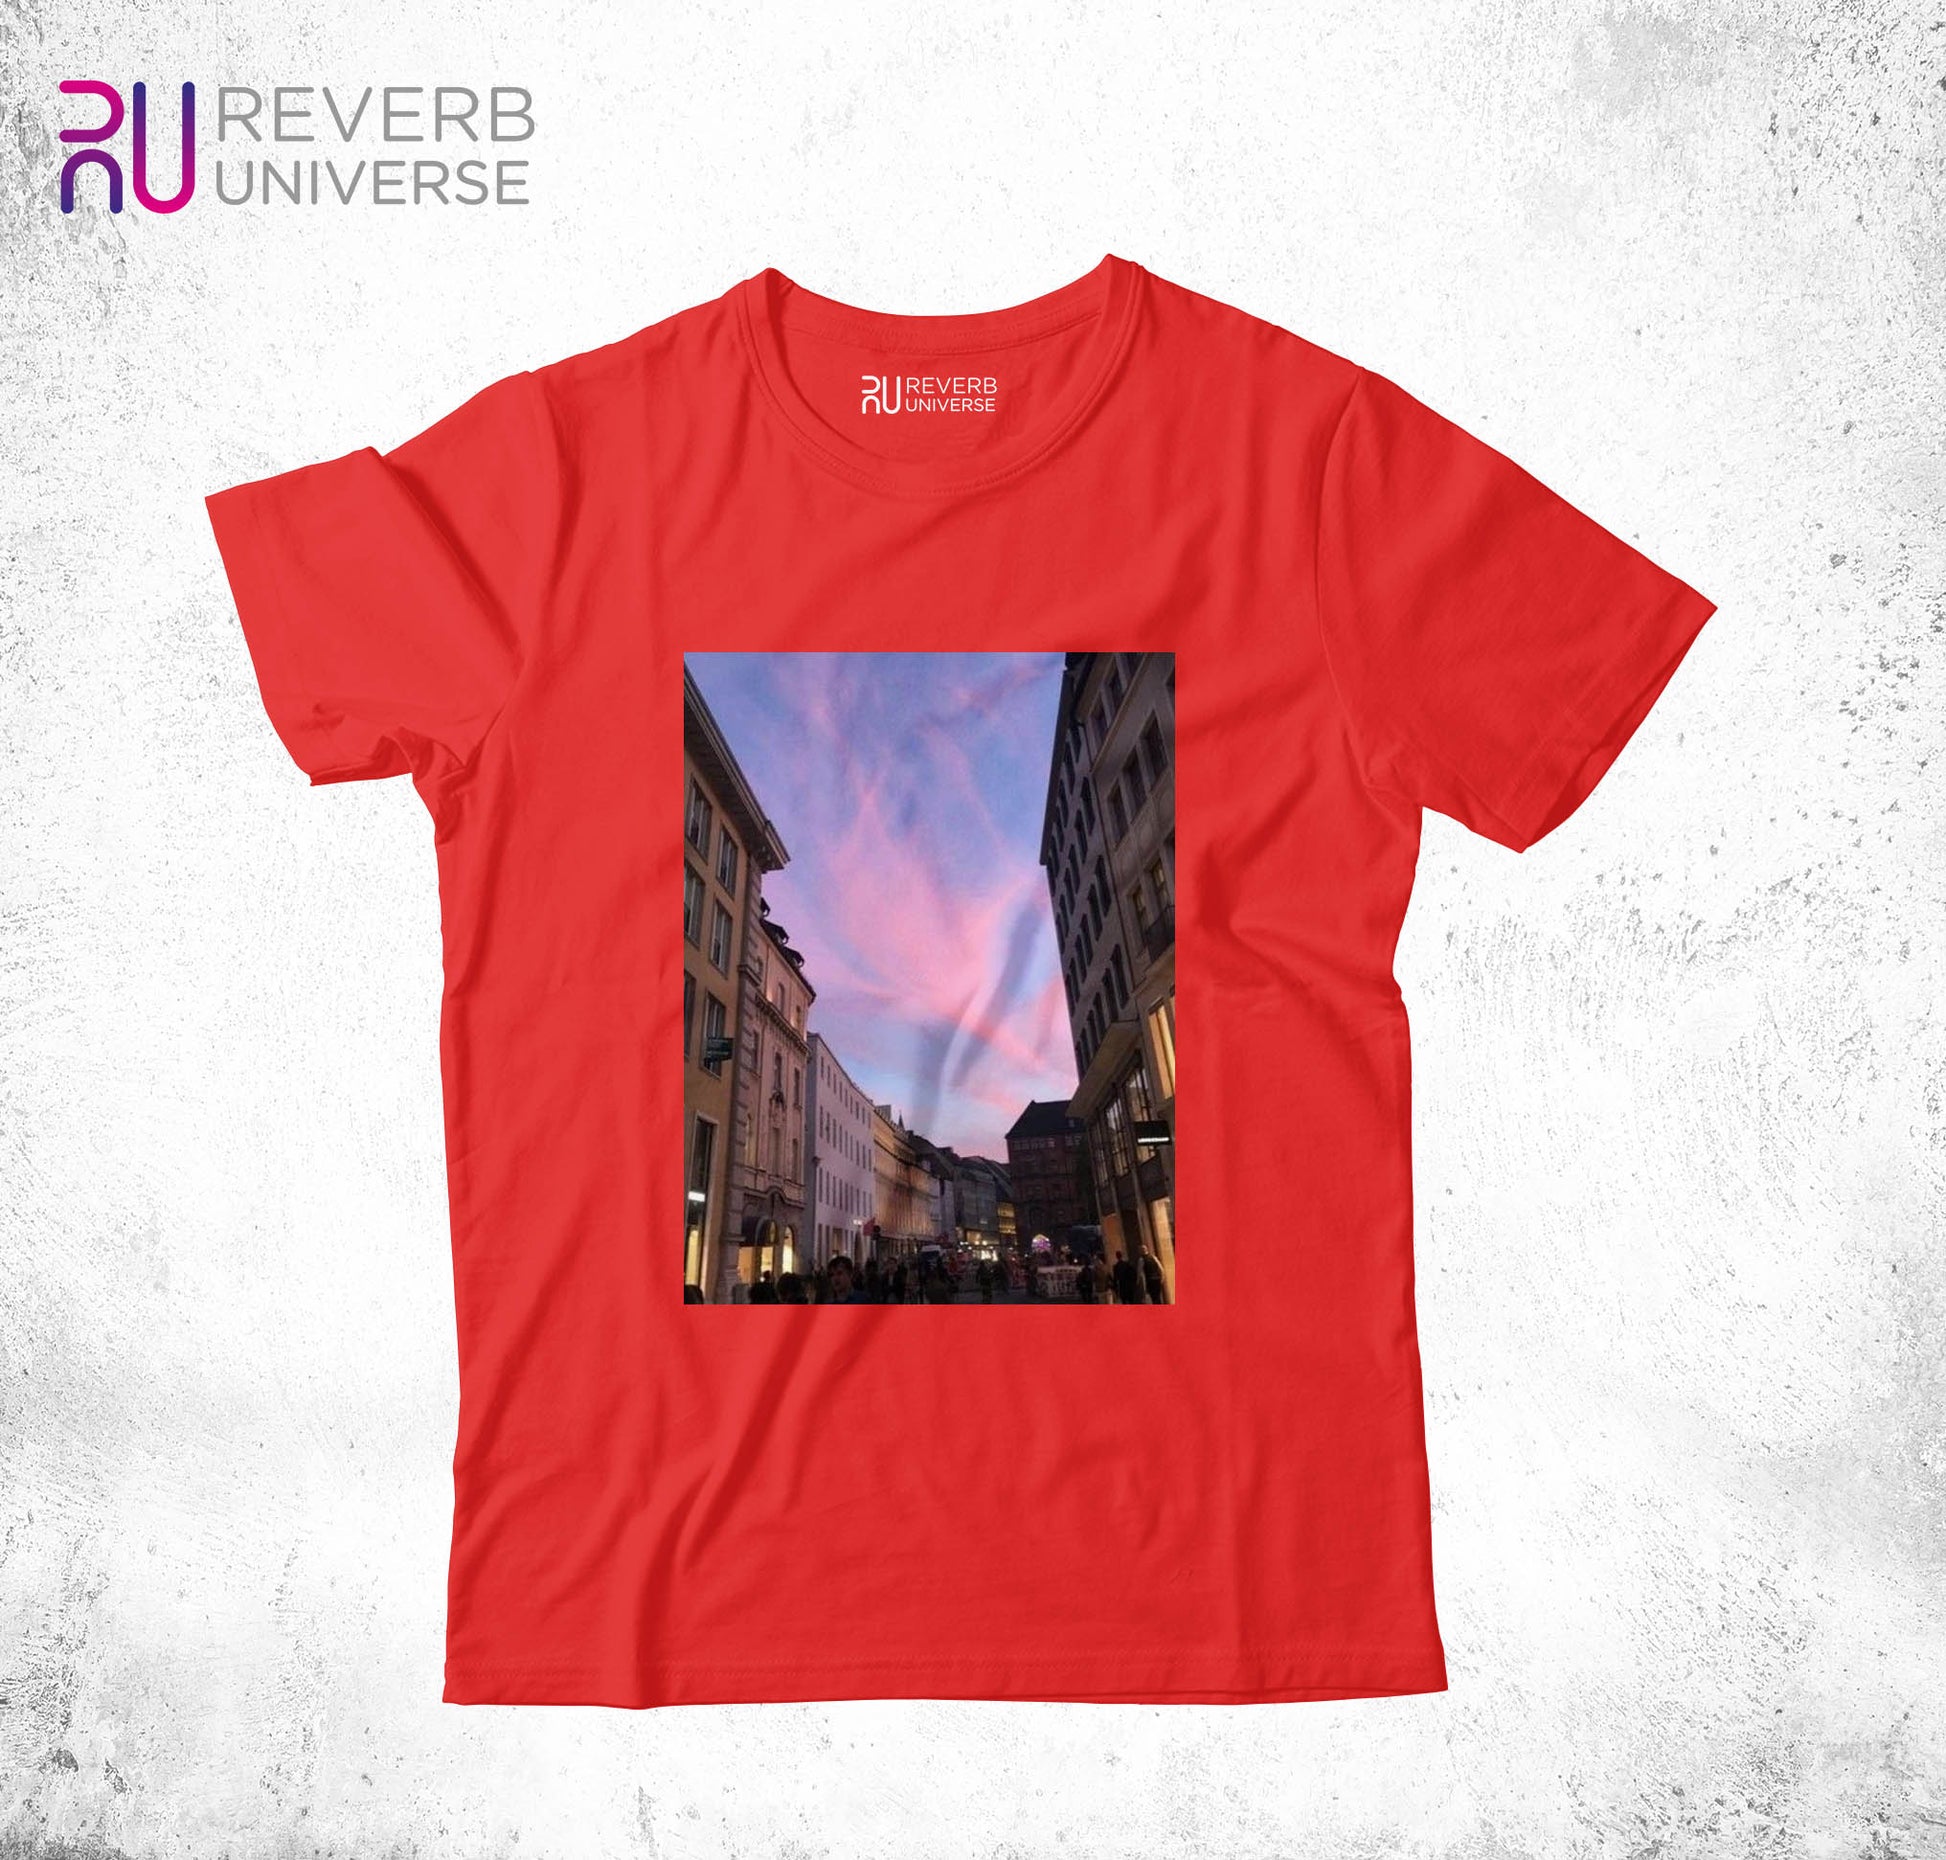 Sky Colors Graphic Tee